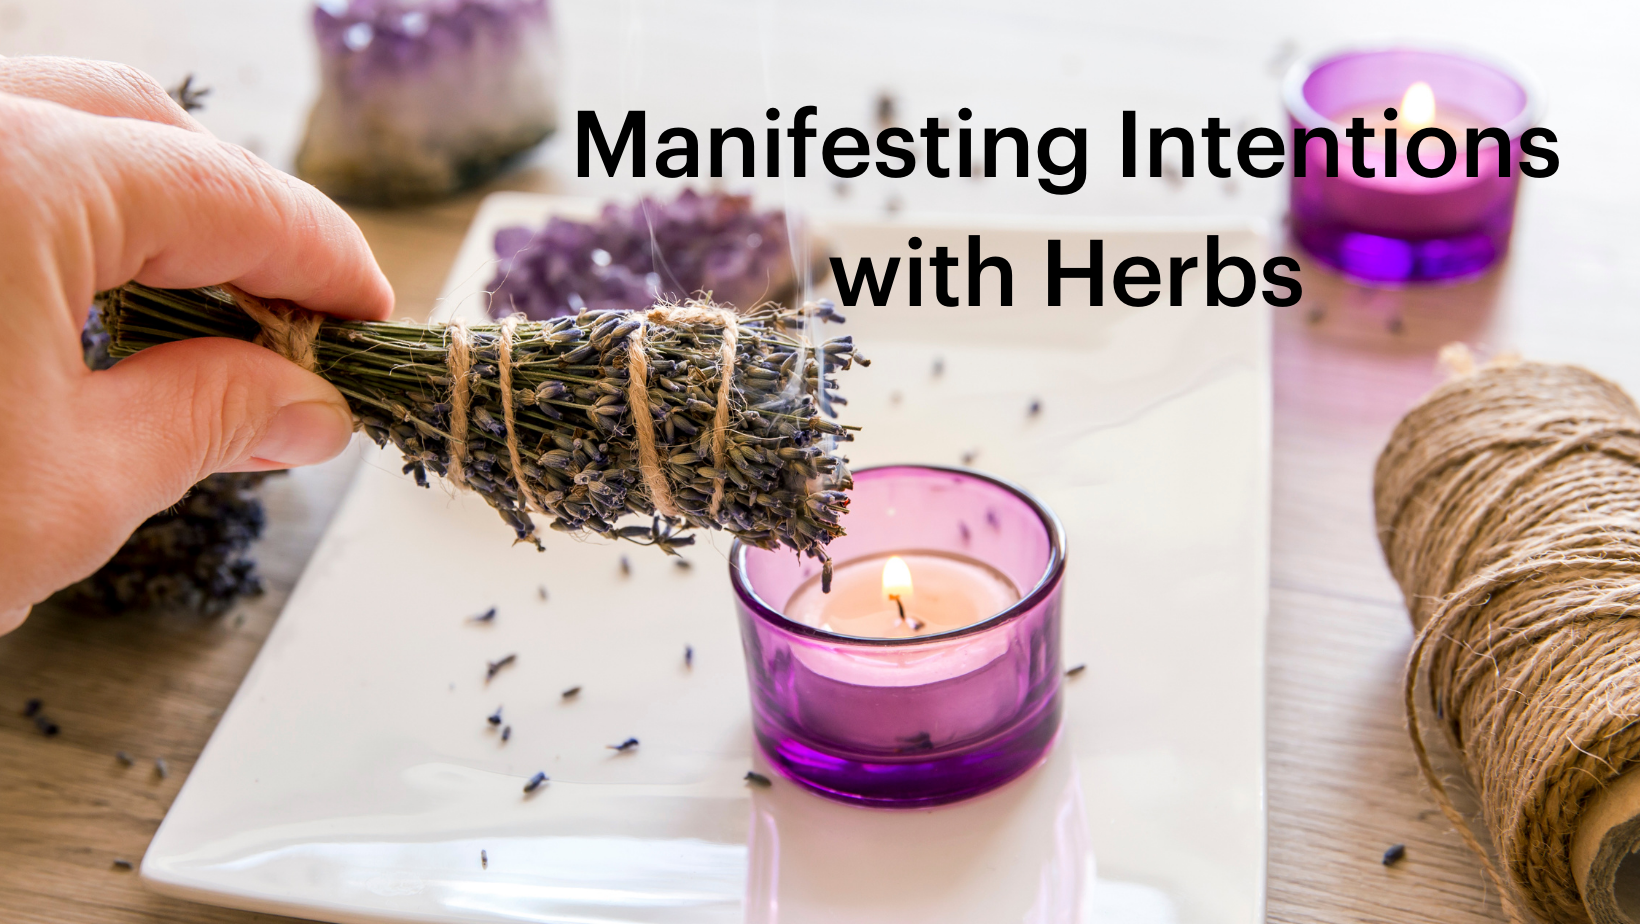 Manifesting Intentions with Herbs